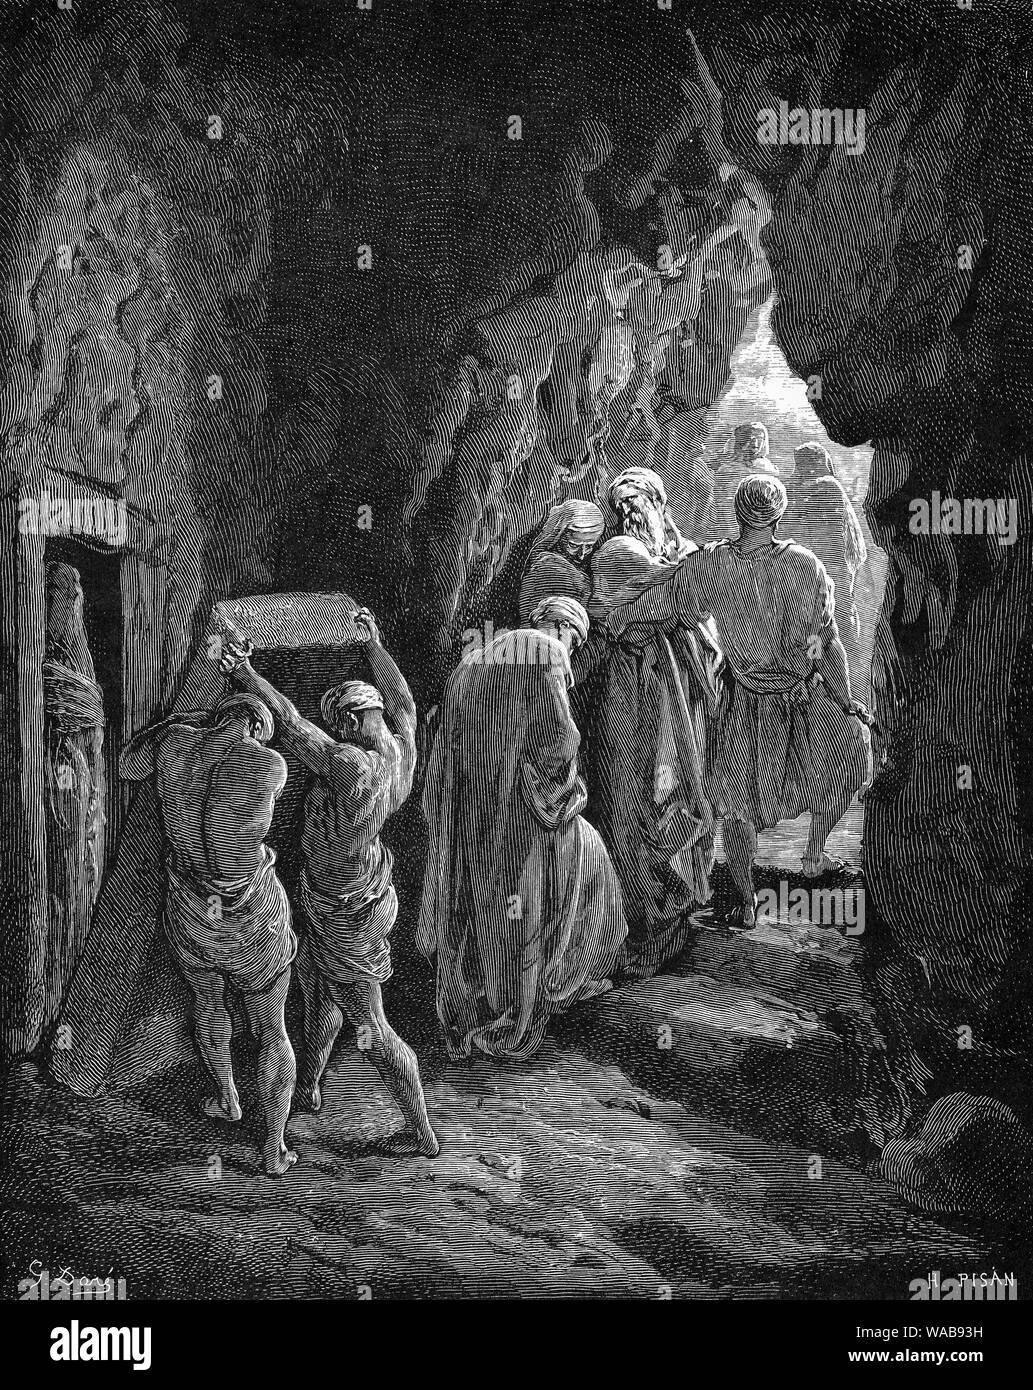 Gustave Doré, The Burial of Sarah, engraving, 1866-1868 Stock Photo